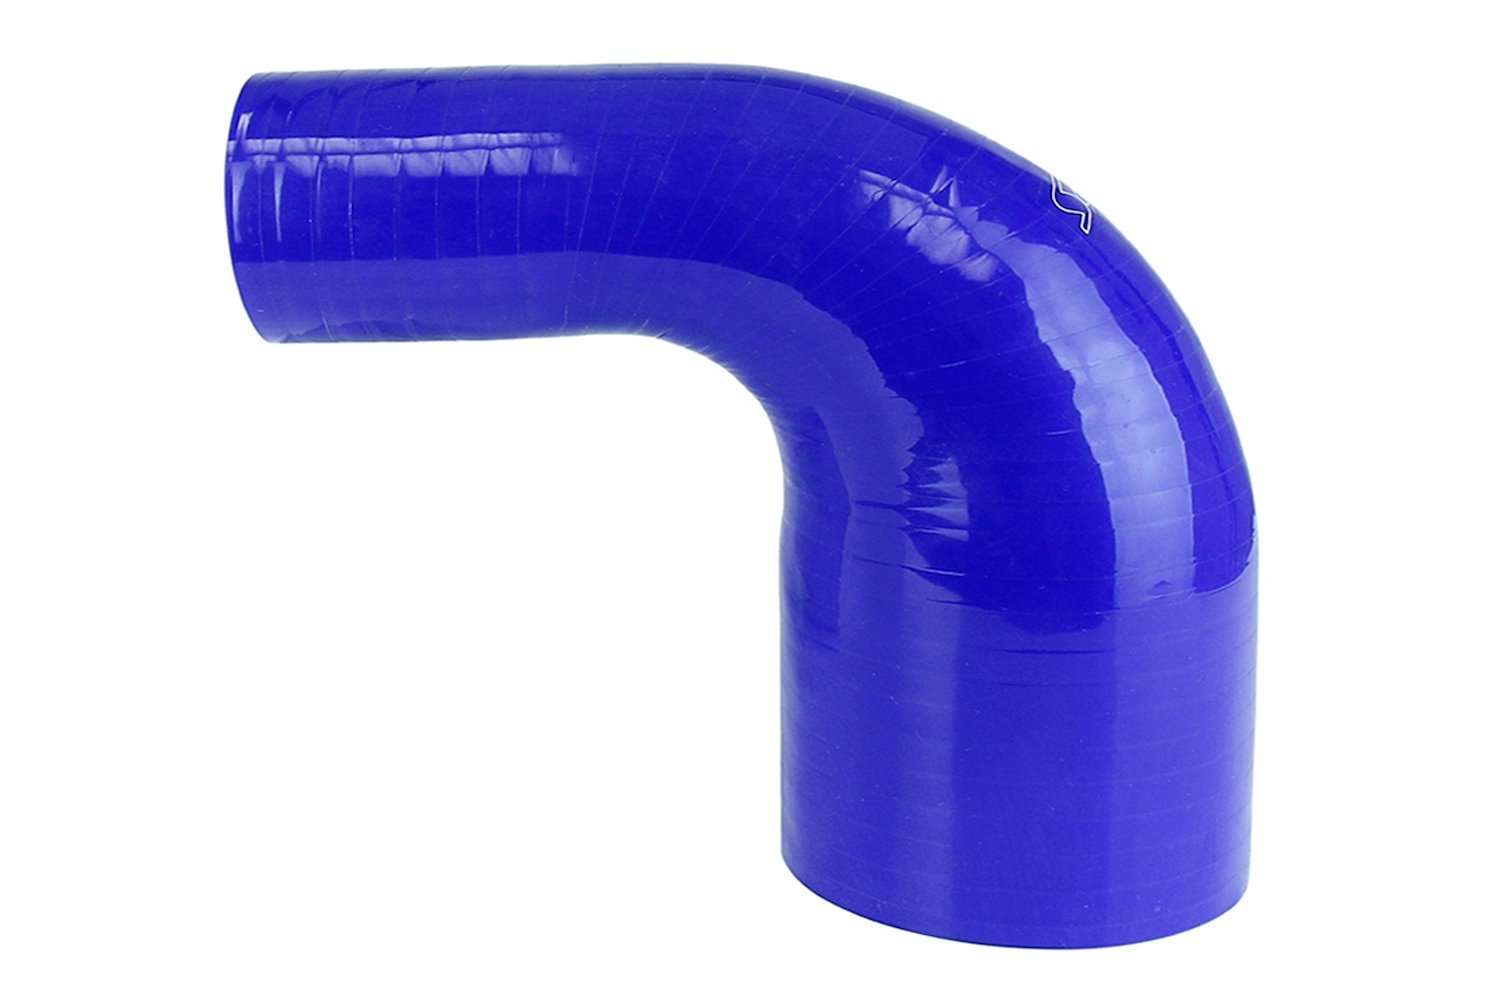 HTSER90-300-425-BLUE Silicone 90-Degree Elbow Hose, High-Temp 4-Ply Reinforced, 3 in. - 4-1/4 in. ID, Blue